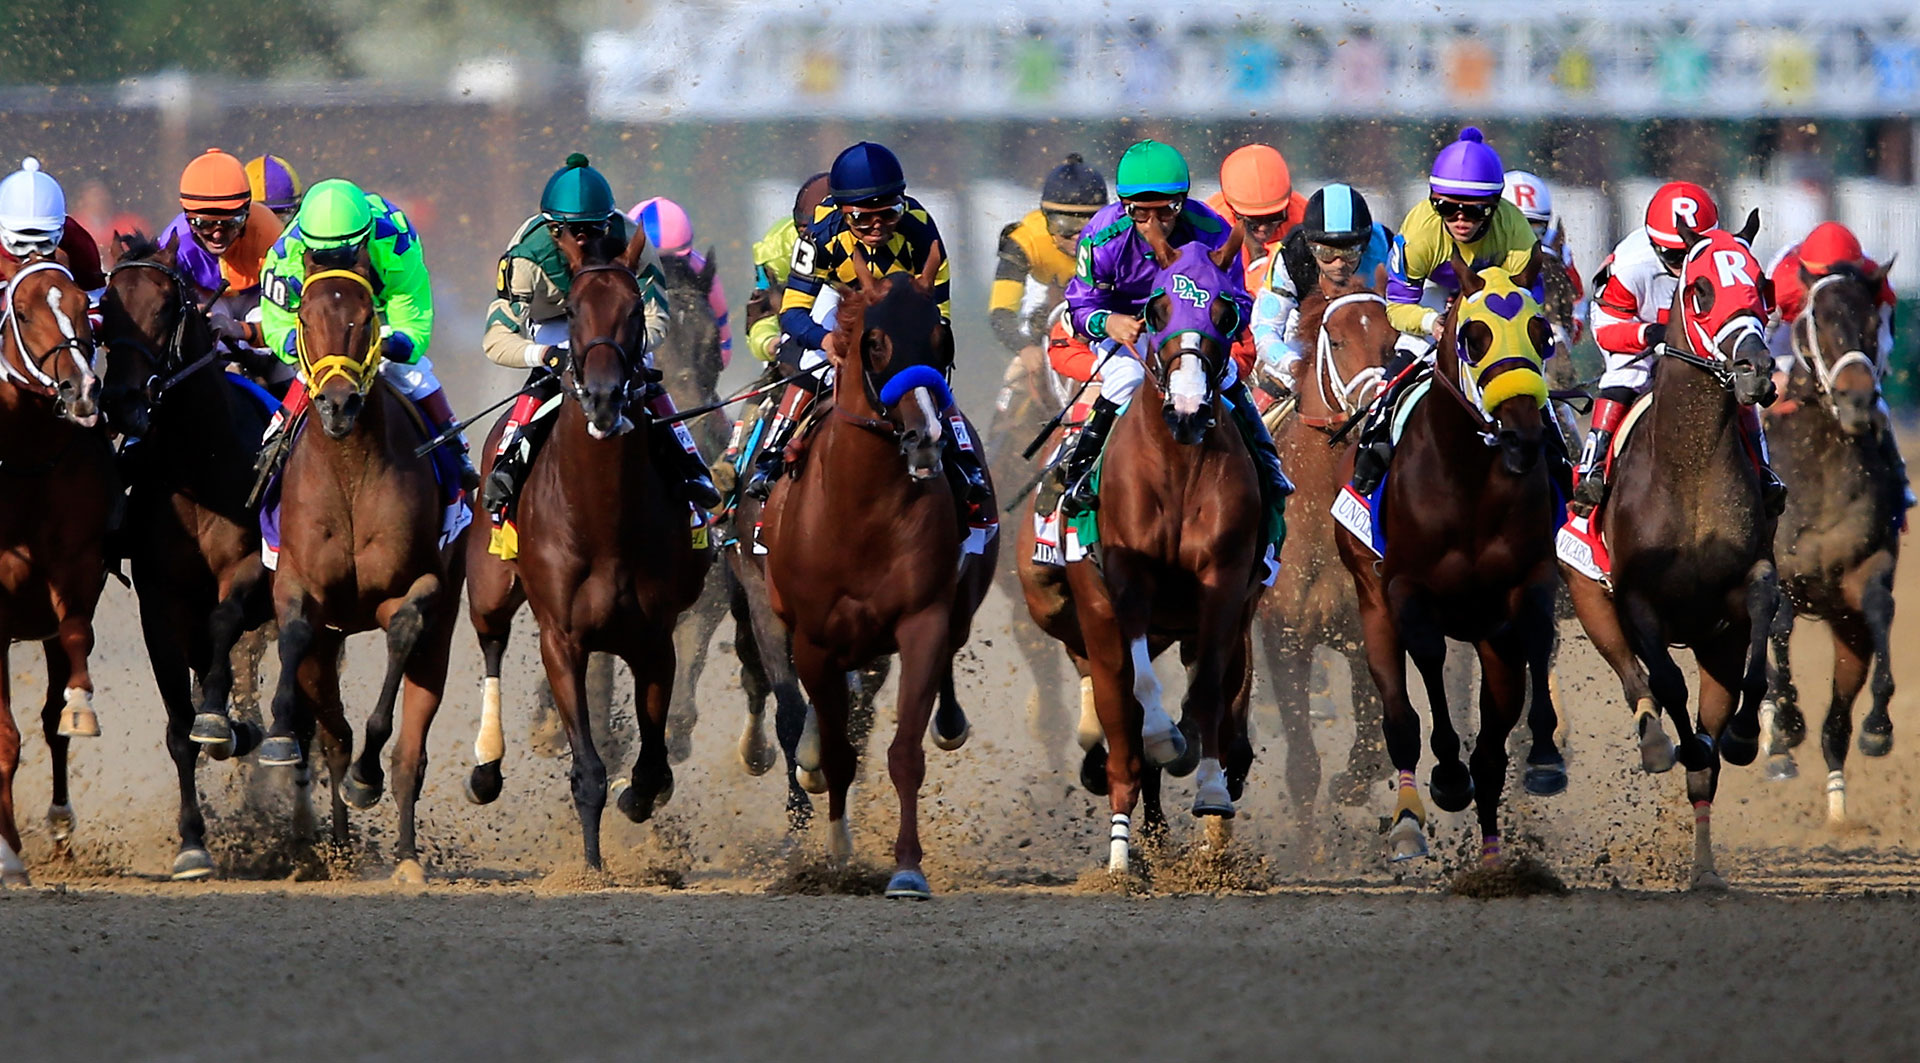 Kentucky Derby On The Mark, But No Guarantees